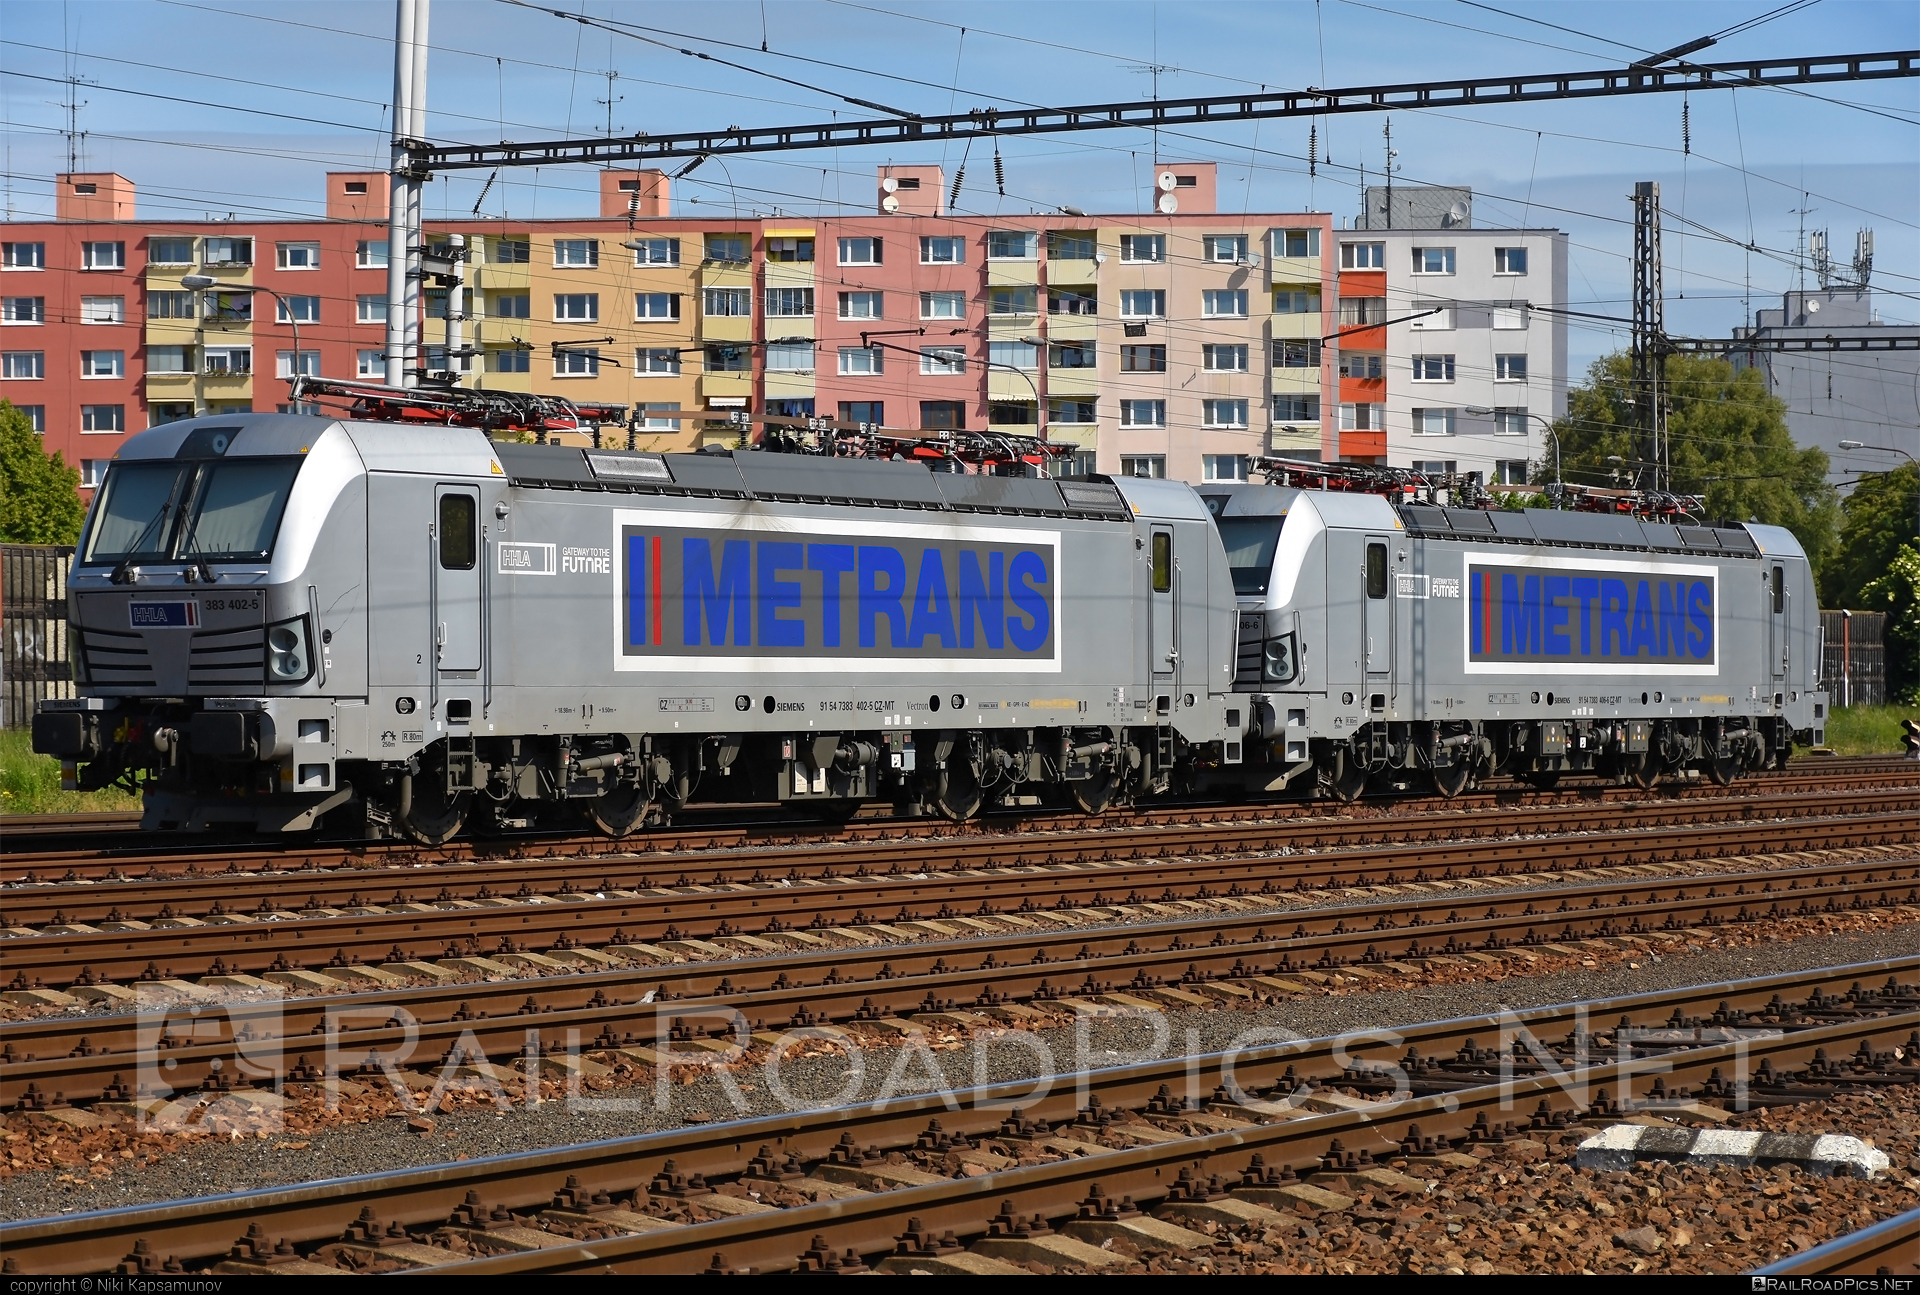 Siemens Vectron MS - 383 402-5 operated by METRANS, a.s. #hhla #metrans #siemens #siemensVectron #siemensVectronMS #vectron #vectronMS